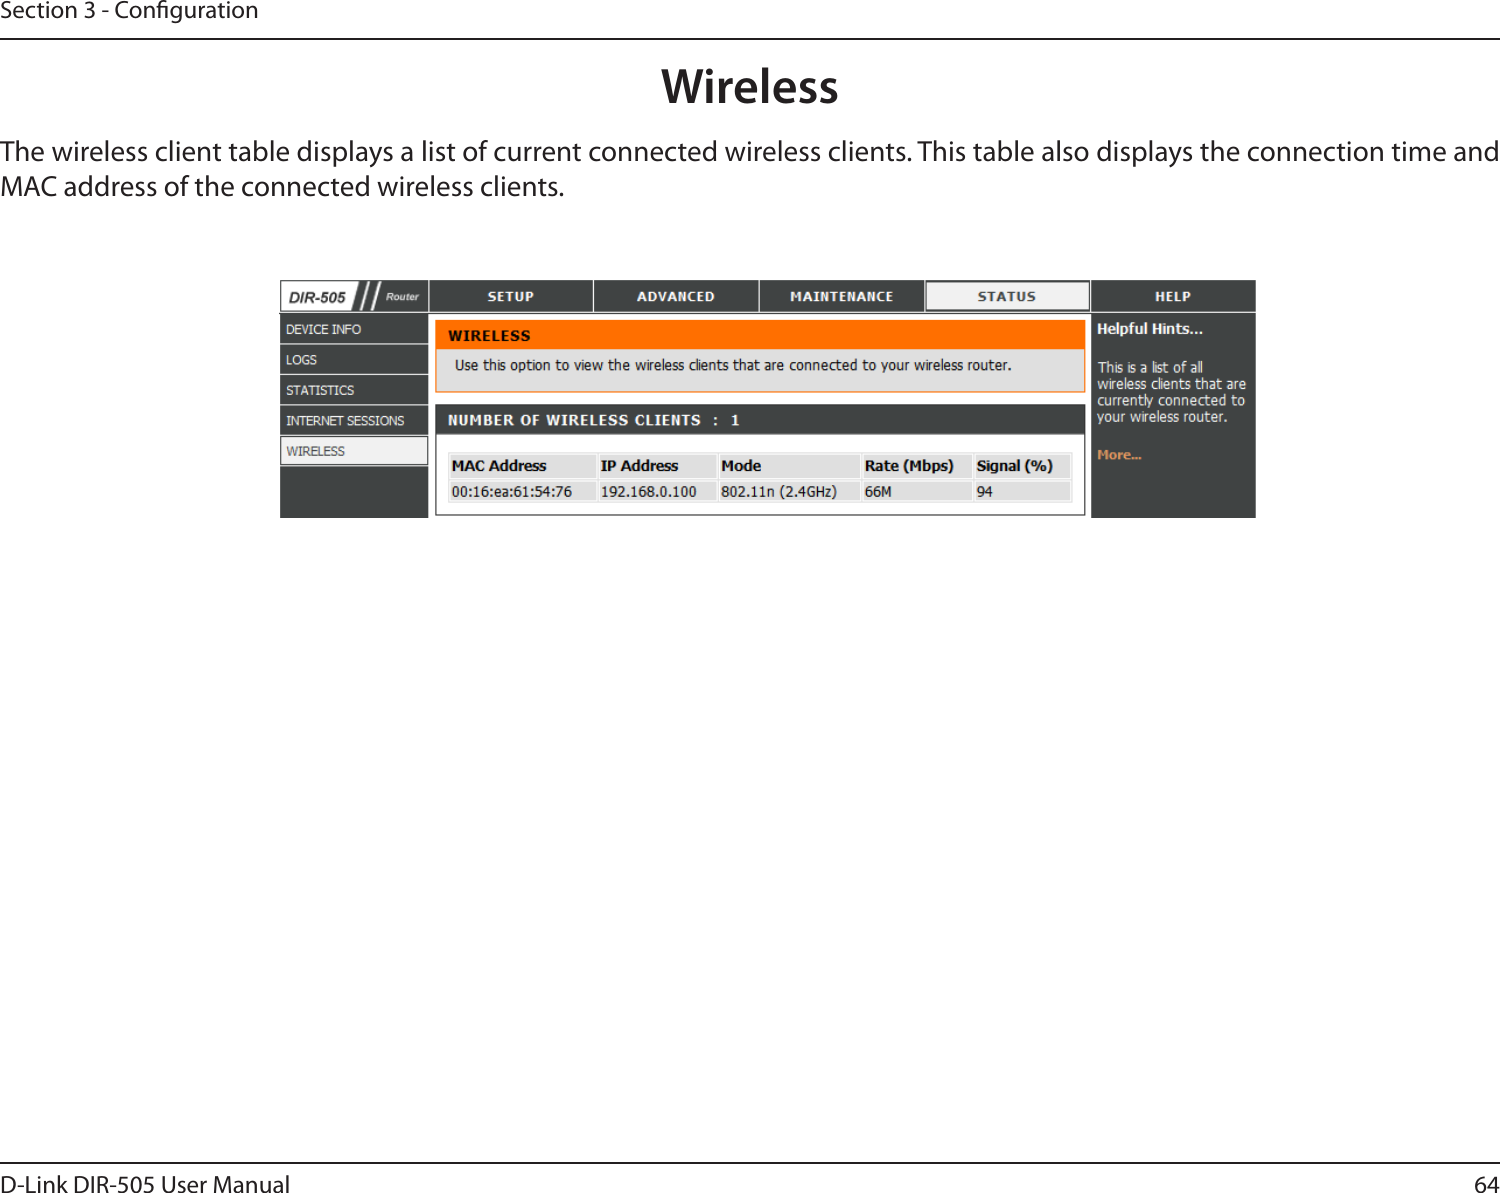 64D-Link DIR-505 User ManualSection 3 - CongurationWireless The wireless client table displays a list of current connected wireless clients. This table also displays the connection time and MAC address of the connected wireless clients.